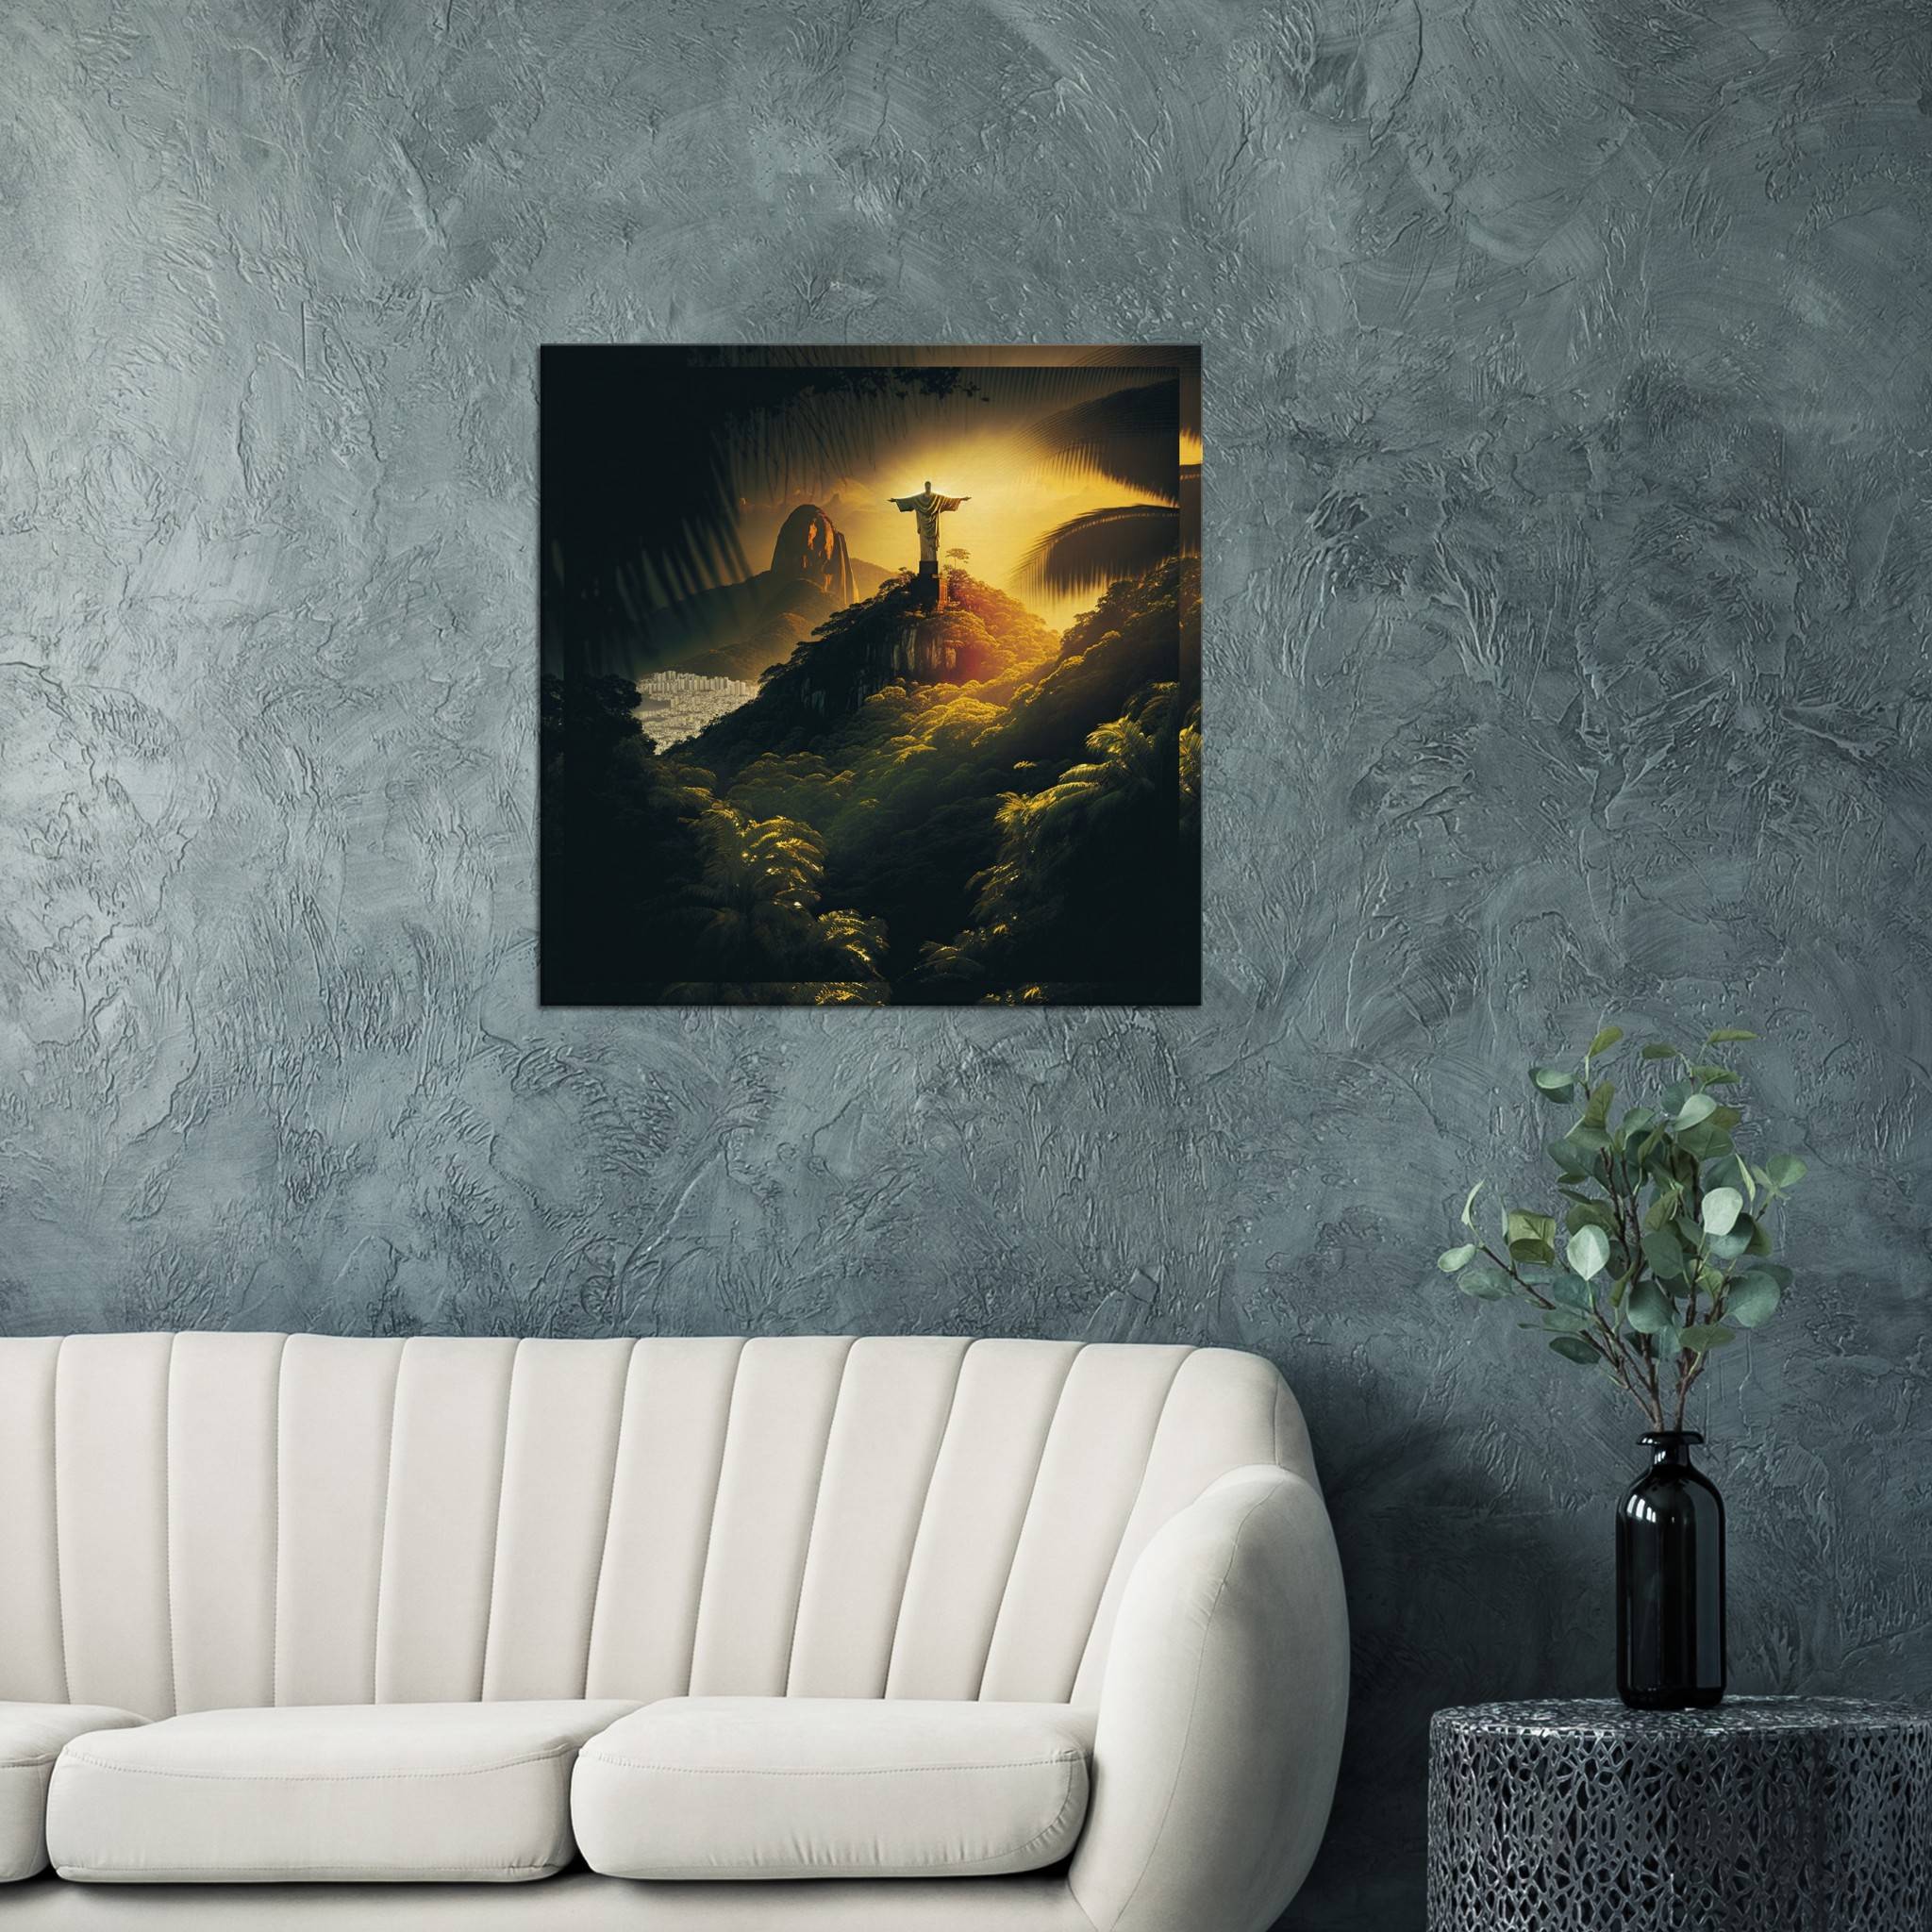 Christ the Redeemer 8 / 60 x 60cm (Canvas Print) Canvas Print Canvas reproduction The Pianist Print On Demand Fabled Gallery https://fabledgallery.art/product/christ-the-redeemer-8-60-x-60cm-canvas-print/